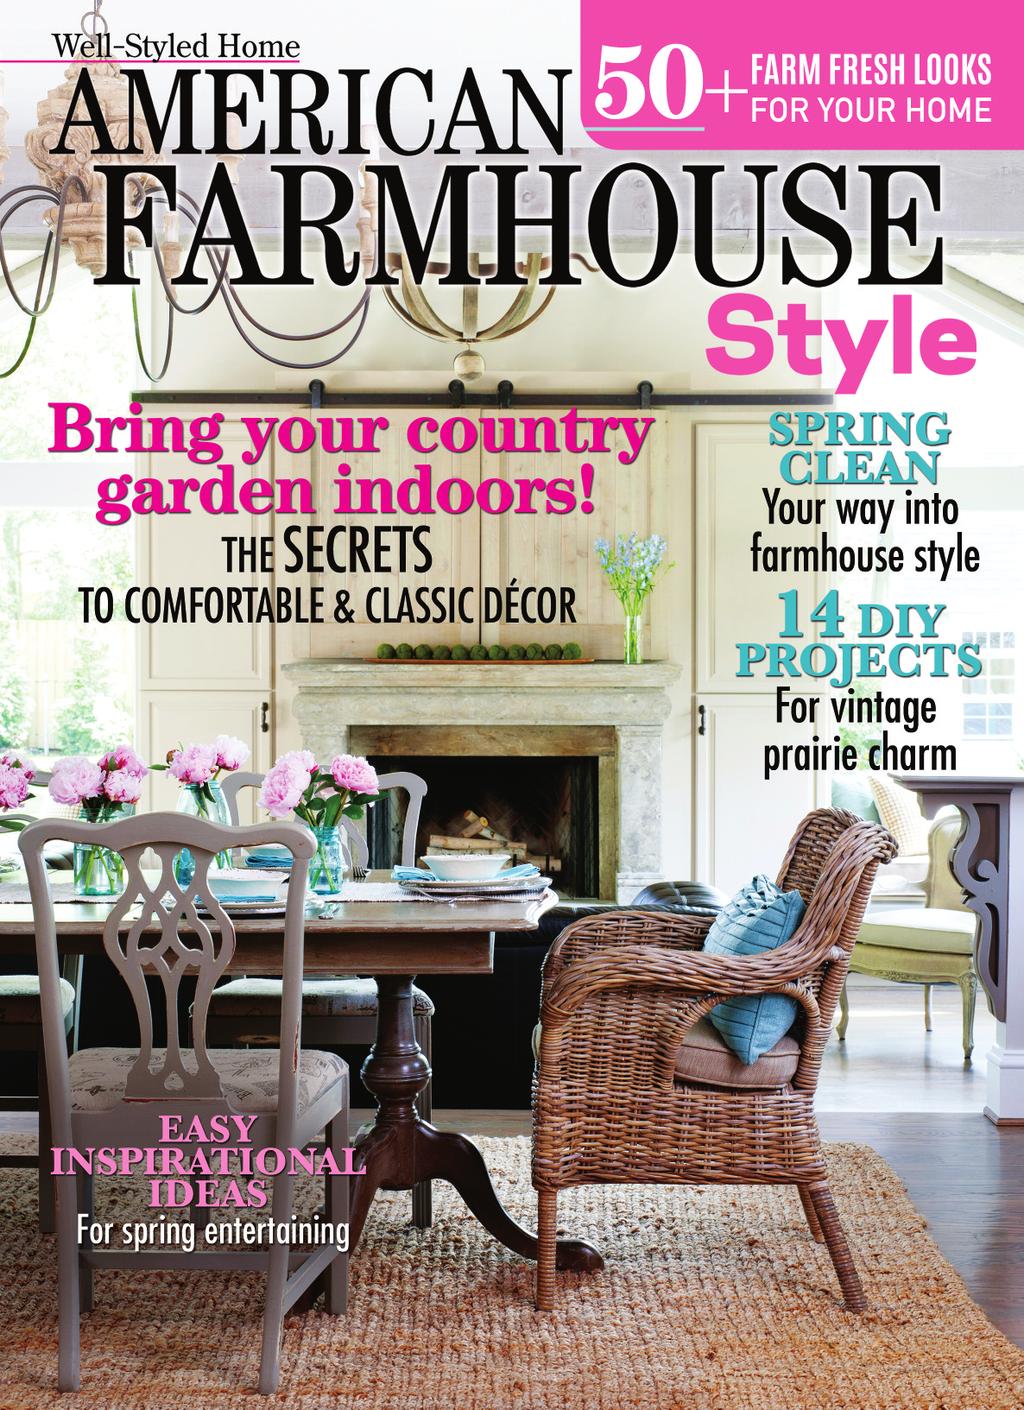 AMERICAN FARMHOUSE STYLE SPRING 2016 BRING YOUR COUNTRY GARDEN INDOORS!